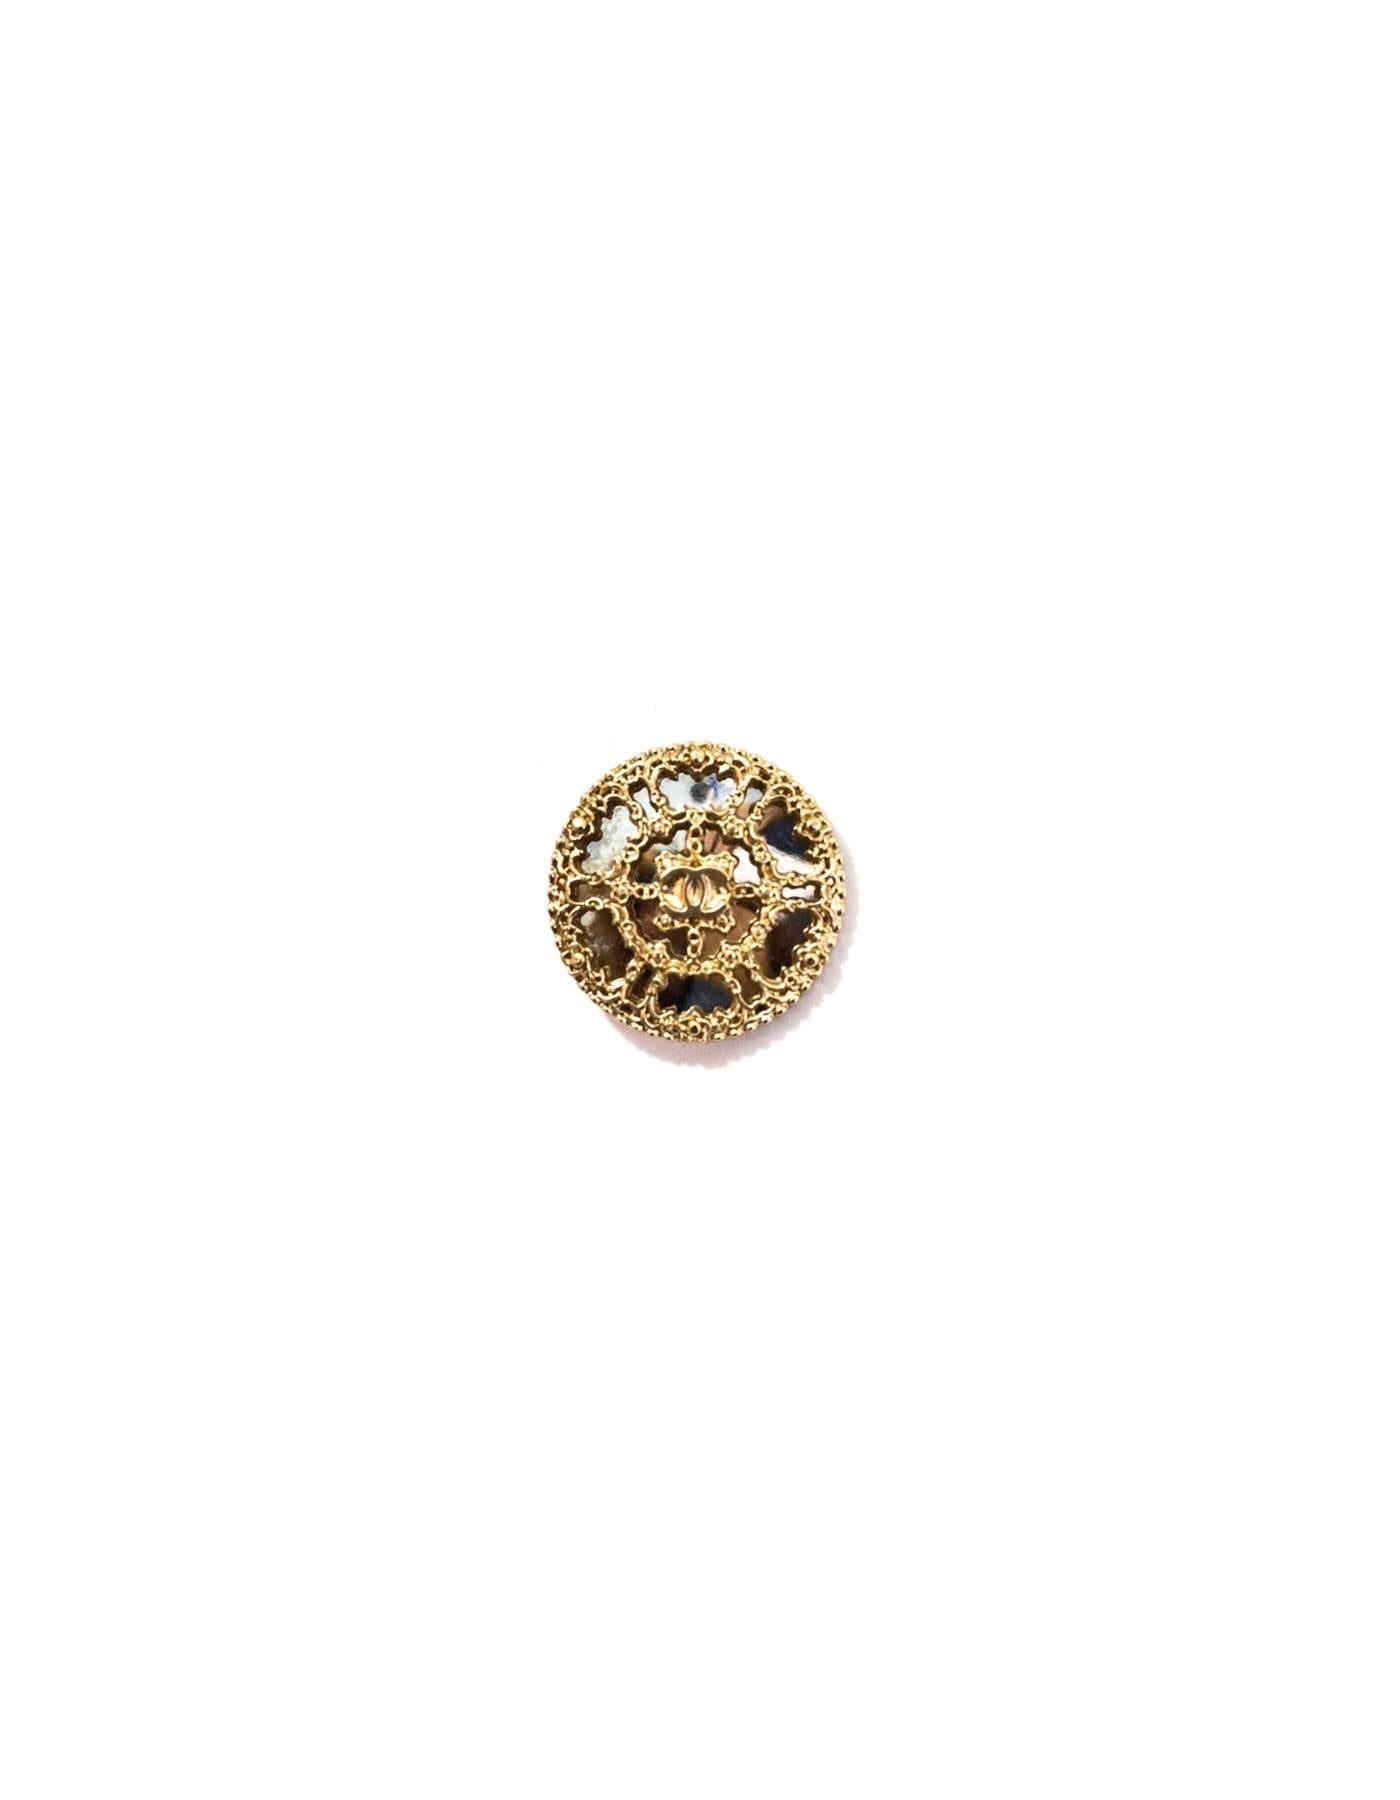 Chanel Goldtone Filigree Mirror Buttons
Features four 22mm CC buttons

Color: Gold, silver
Hardware: Goldtone
Materials: Metal, mirror
Overall Condition: Very good good pre-owned condition, light surface marks

Measurements: 
Diameter: 22mm